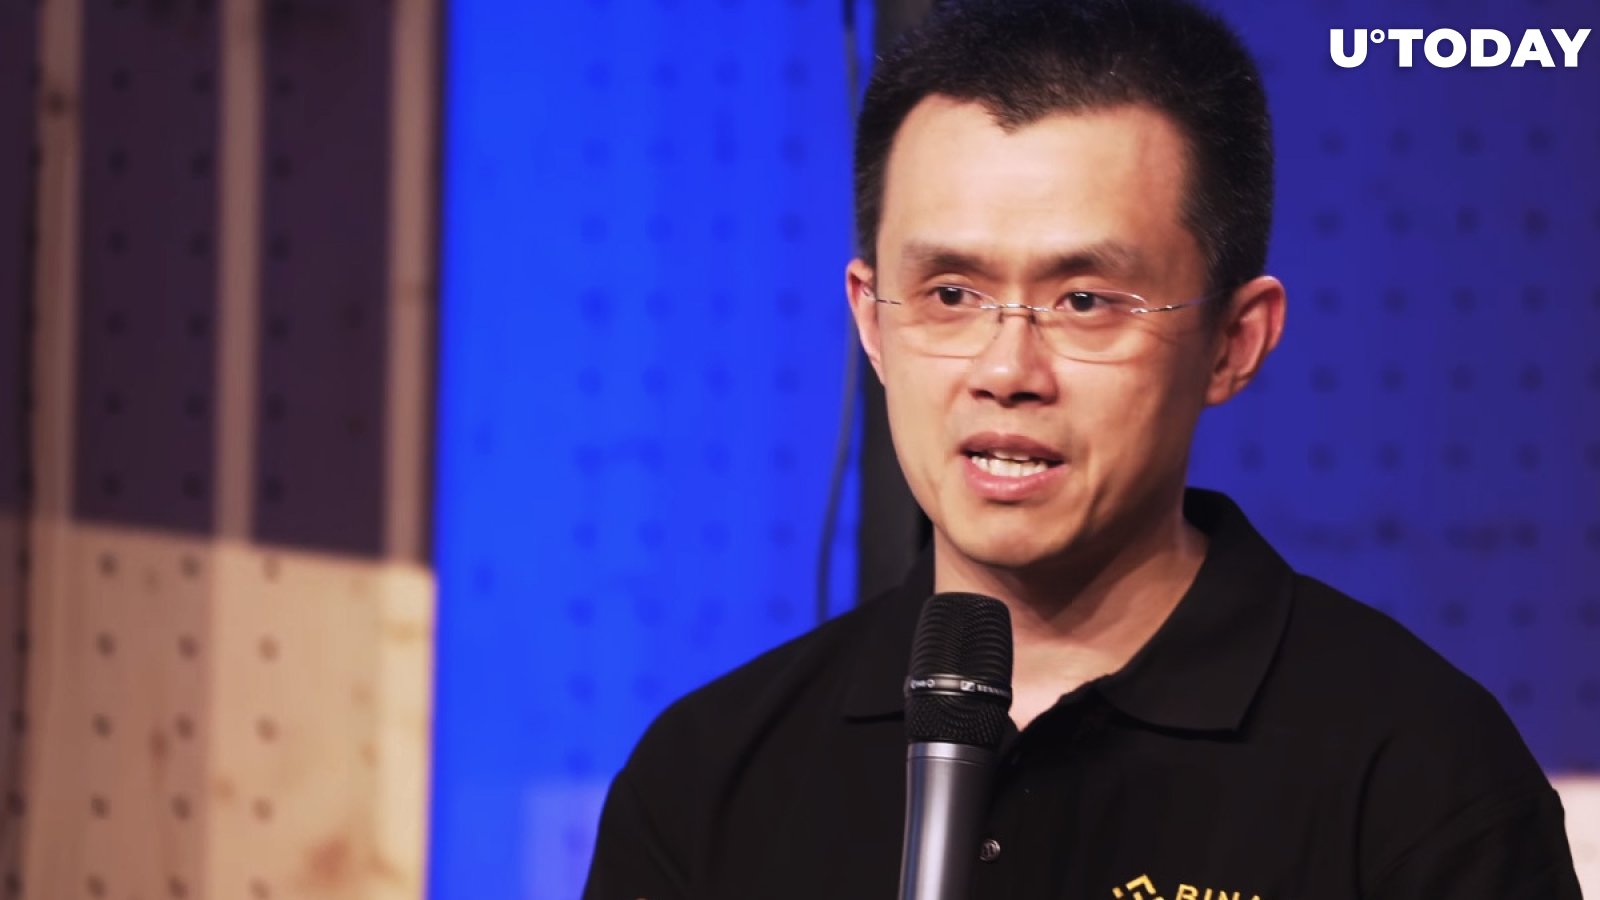 Binance's CZ Continues to Hold These Cryptocurrencies